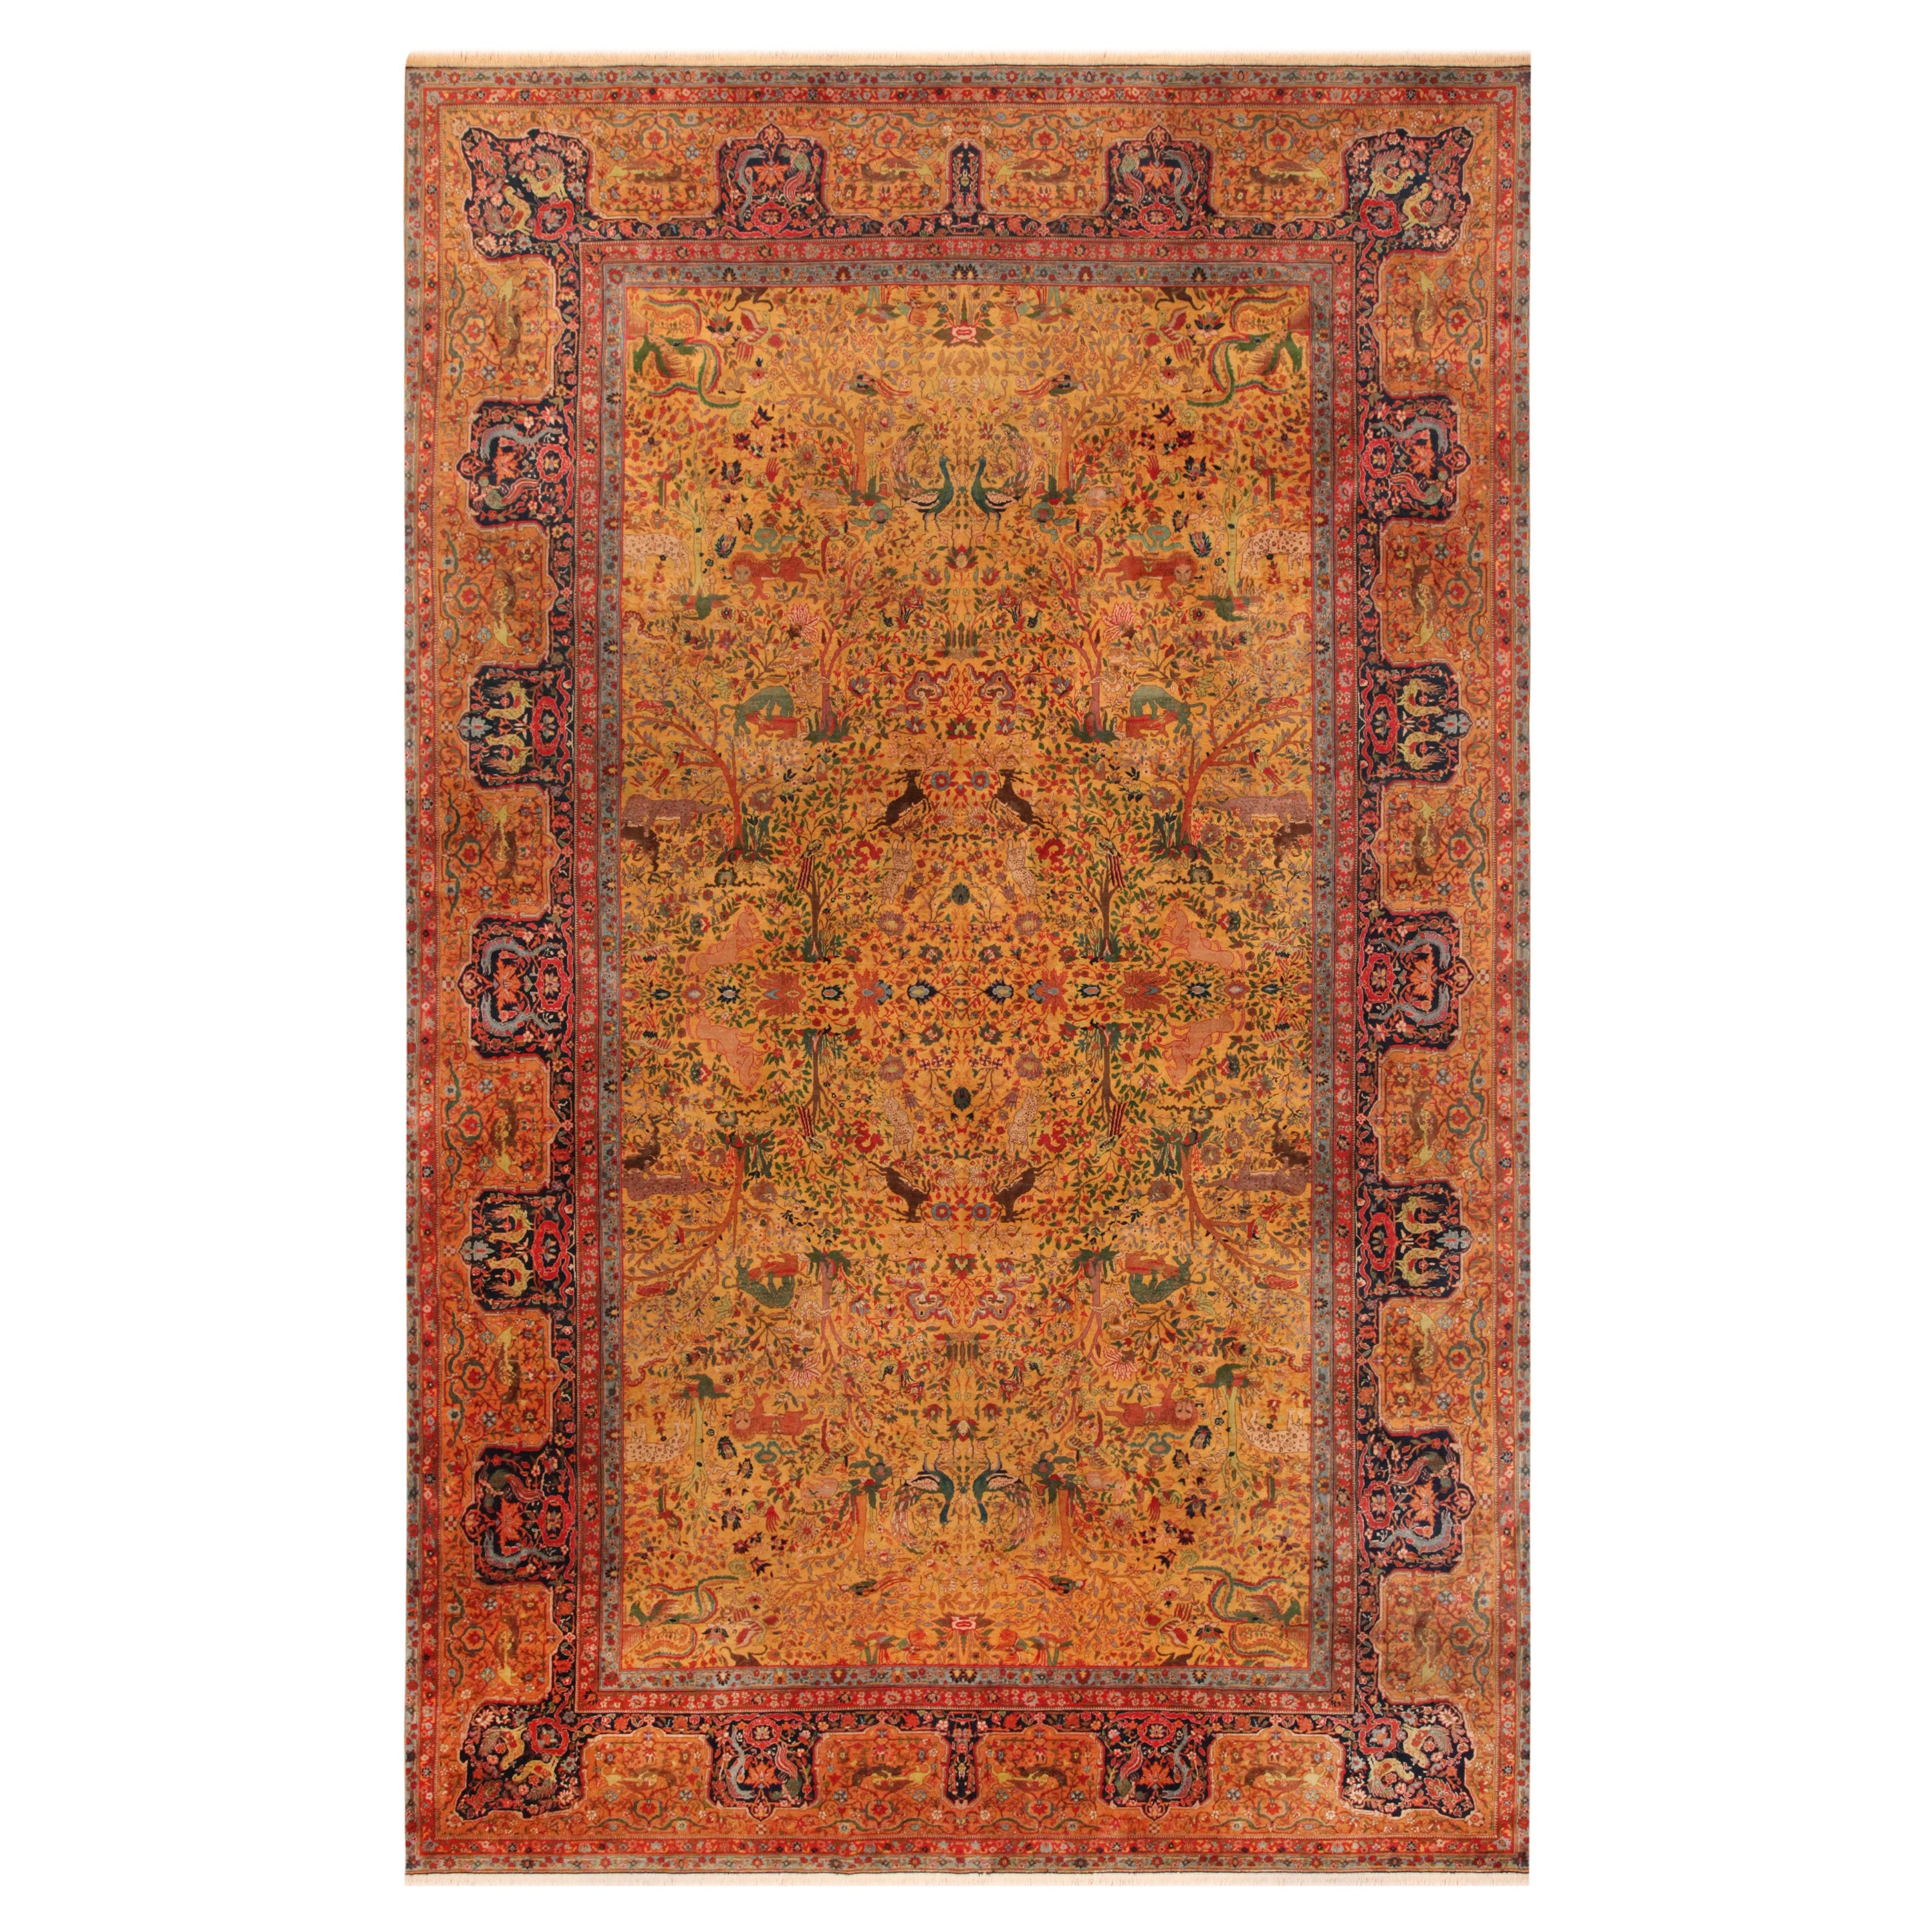 Antique Indian Agra Rug. Size: 11 ft x 17 ft 8 in